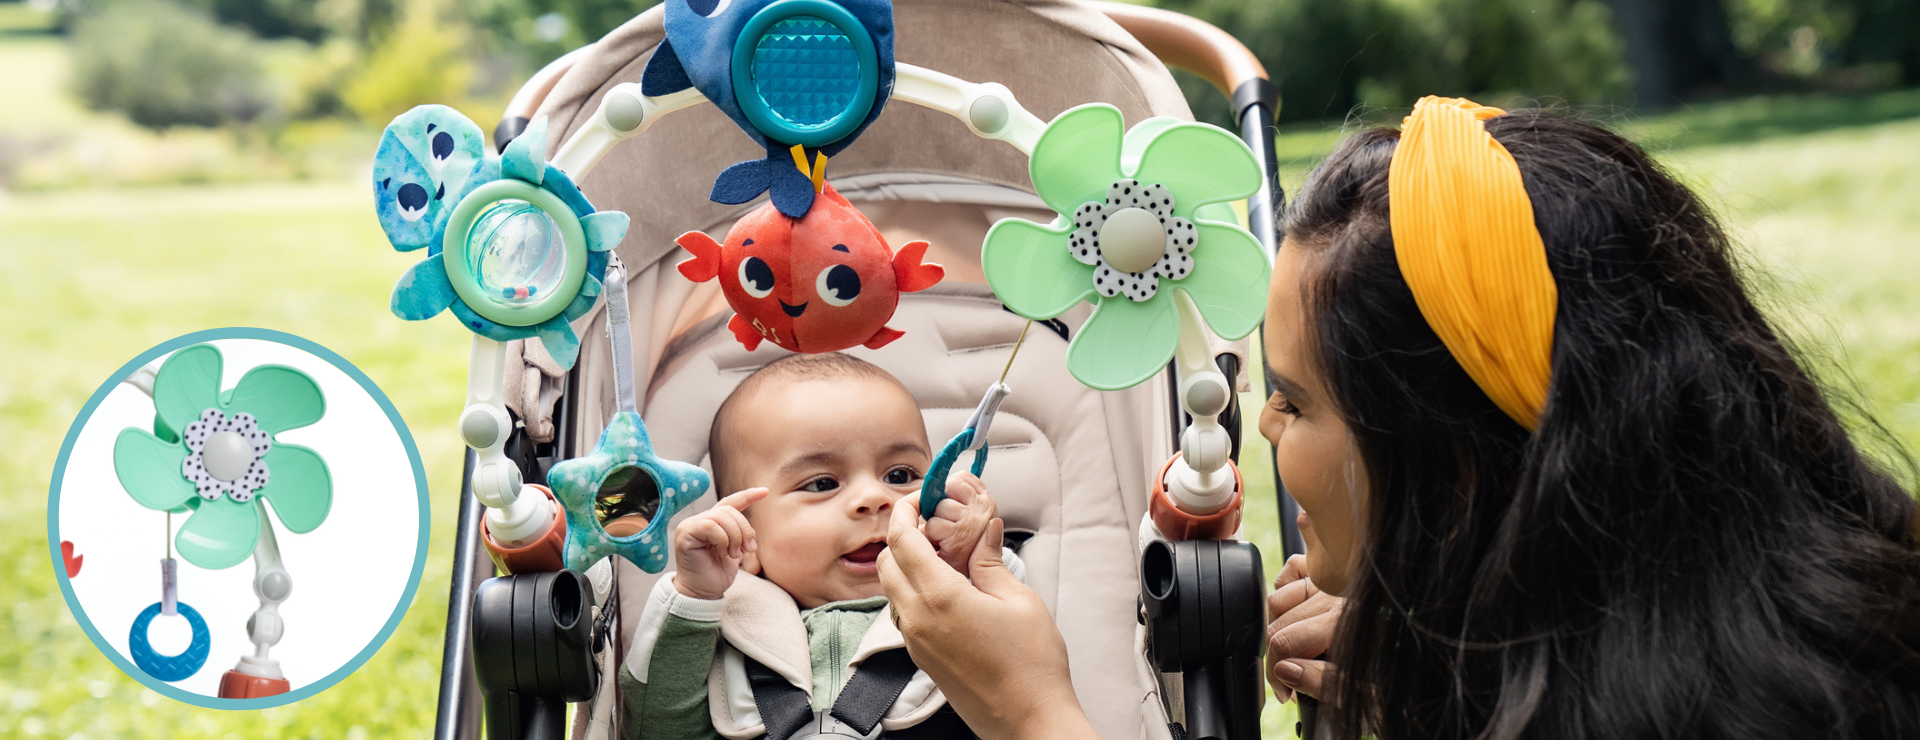 Baby-activated propeller spins when baby pulls the handle, supporting cognitive development